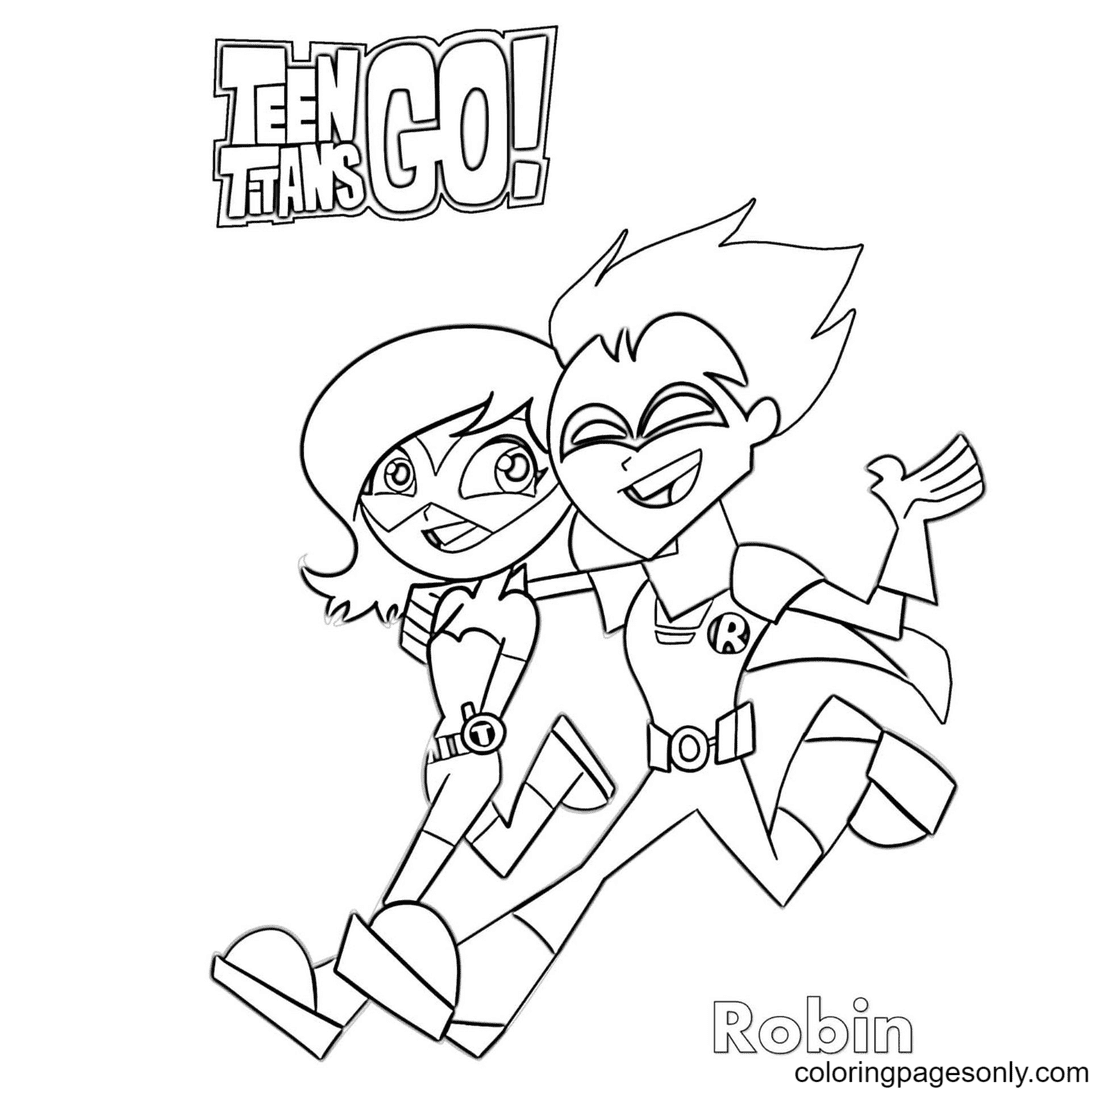 Robin and friend Teen Titans Go Coloring Pages